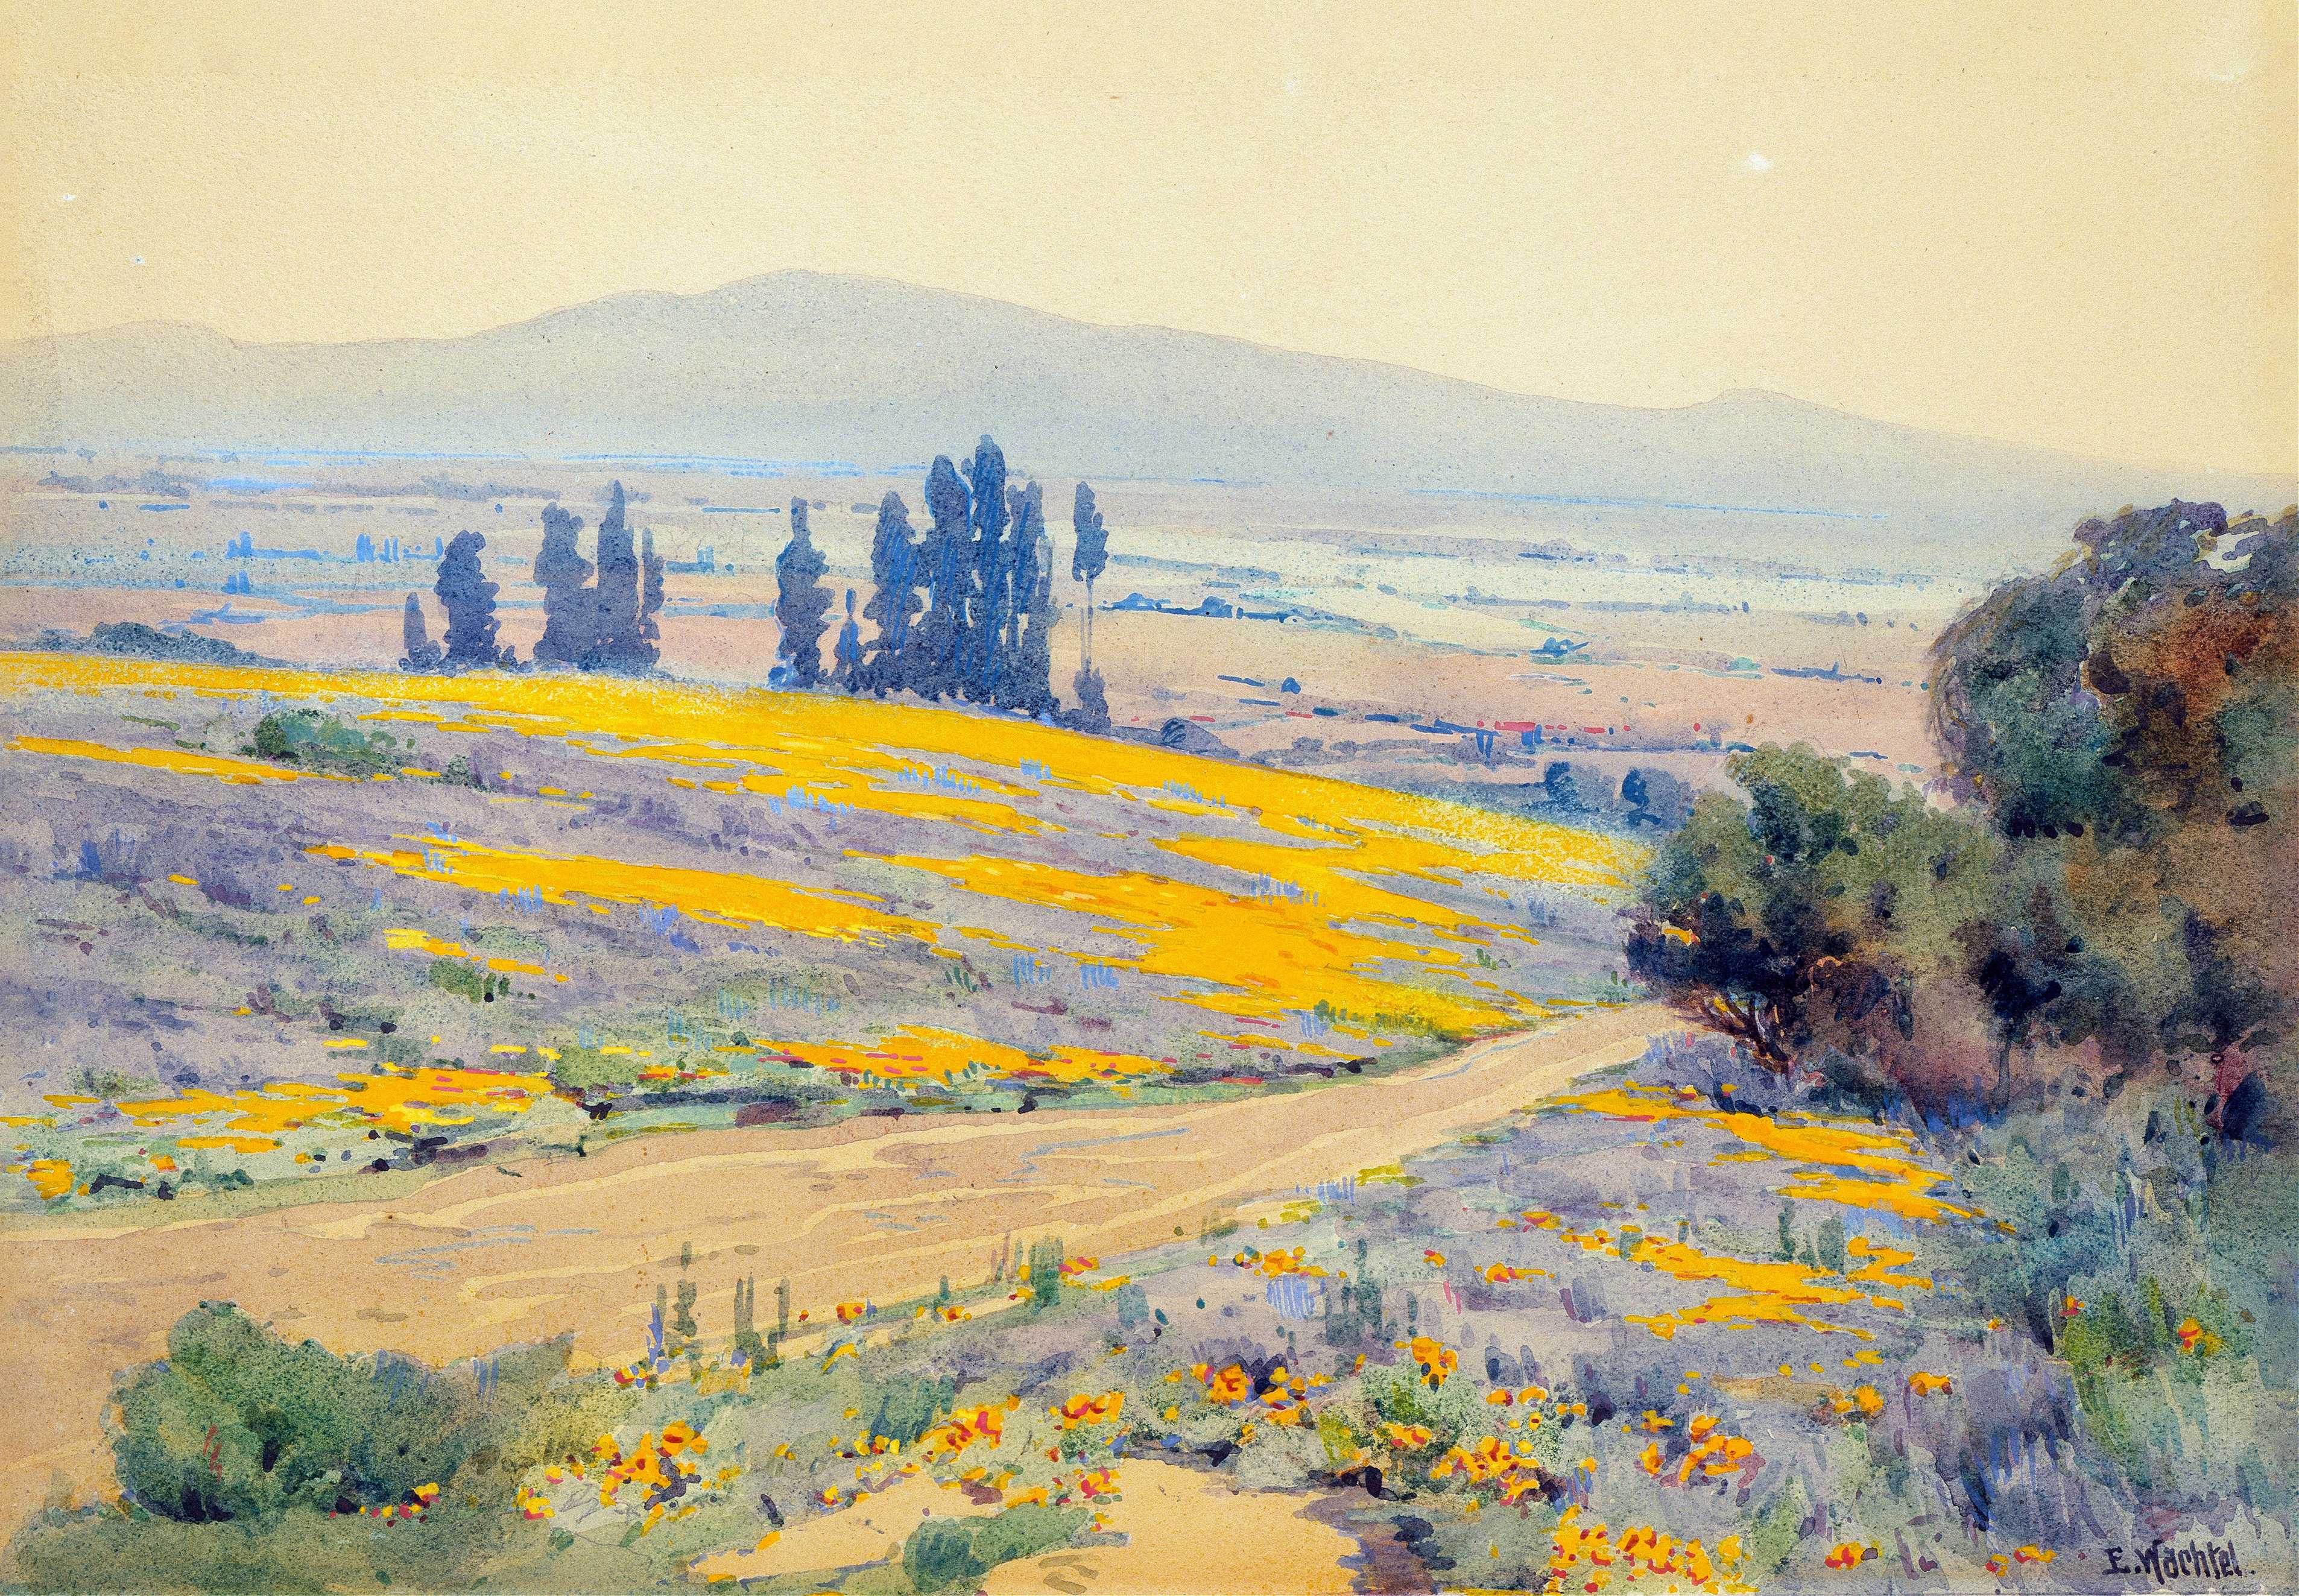 Find out more about Elmer Wachtel - California Spring Landscape